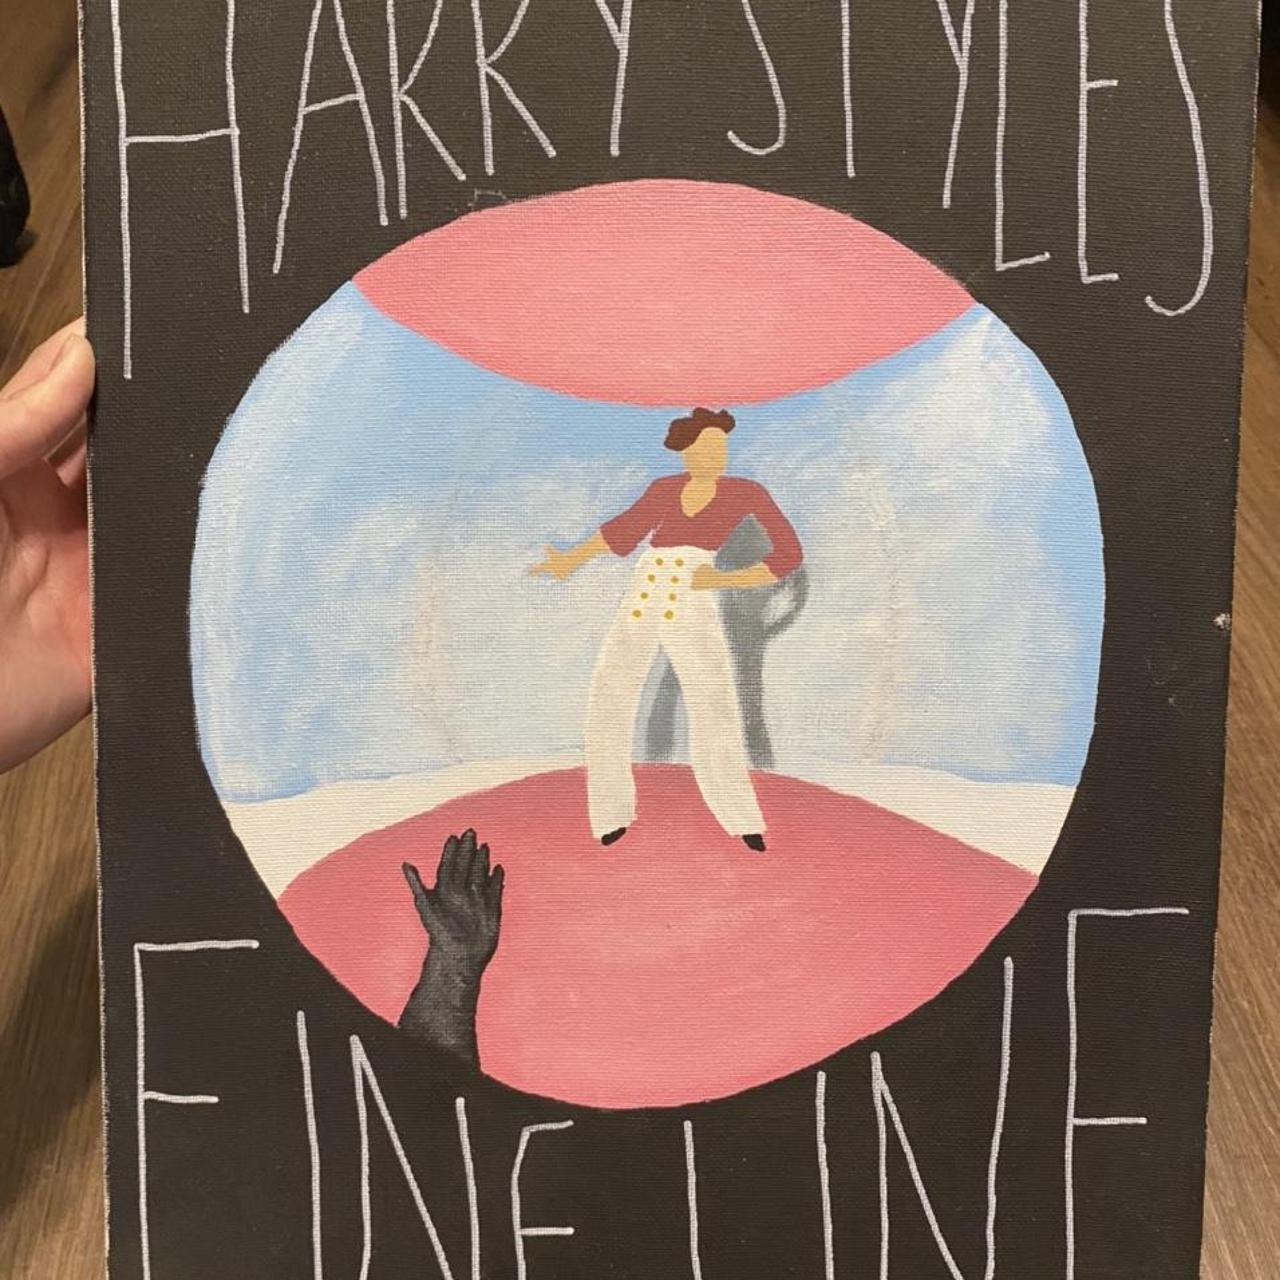 Product Image 2 - harry styles fine line painting
12